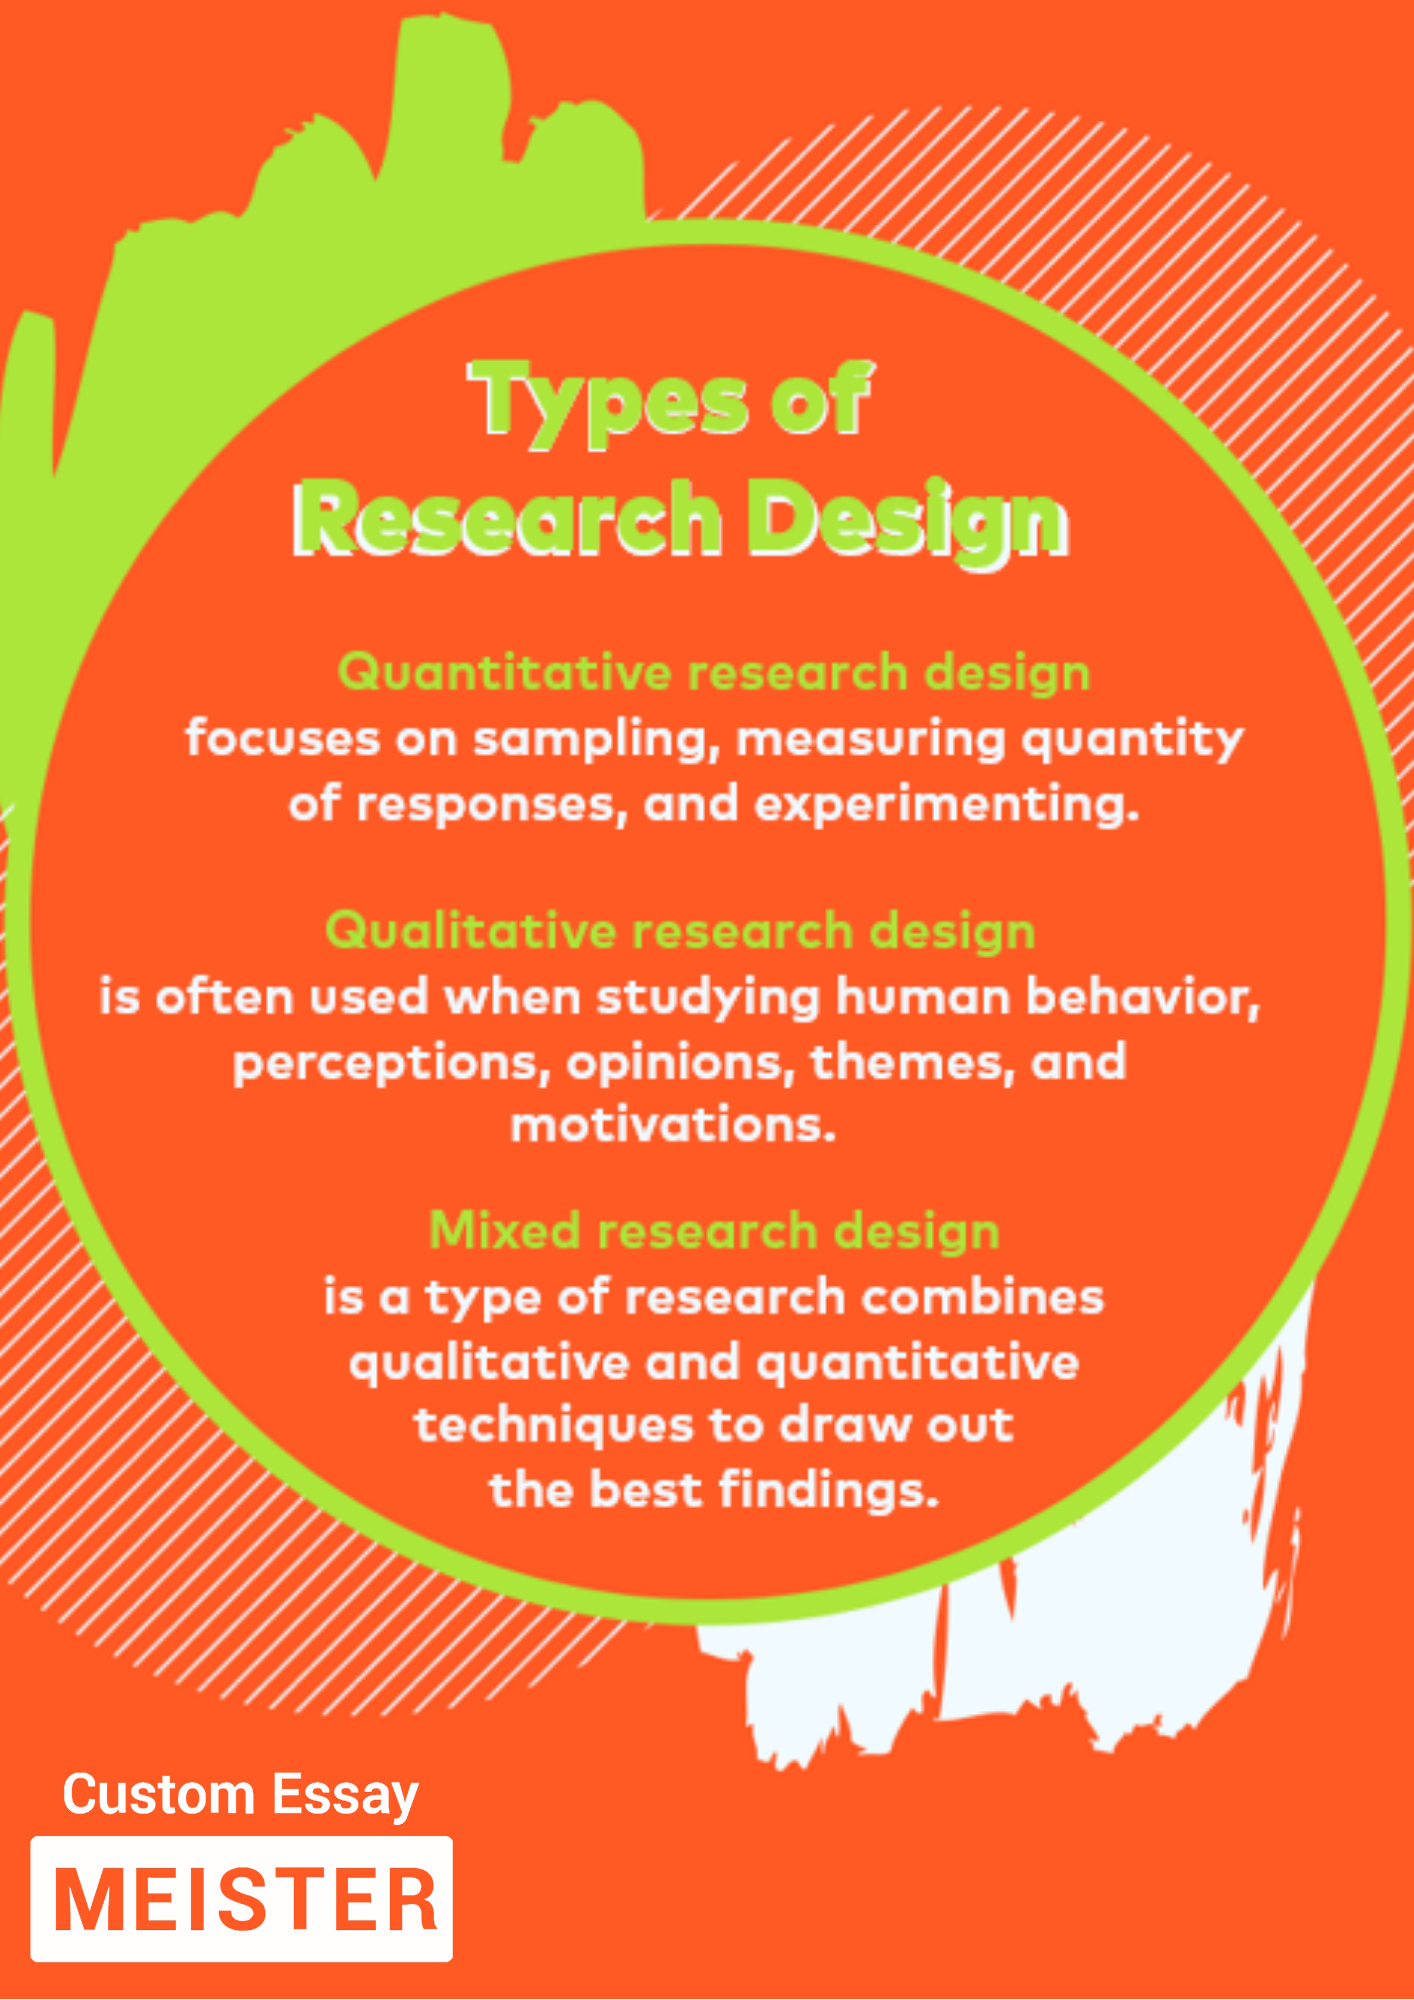 writing the research design